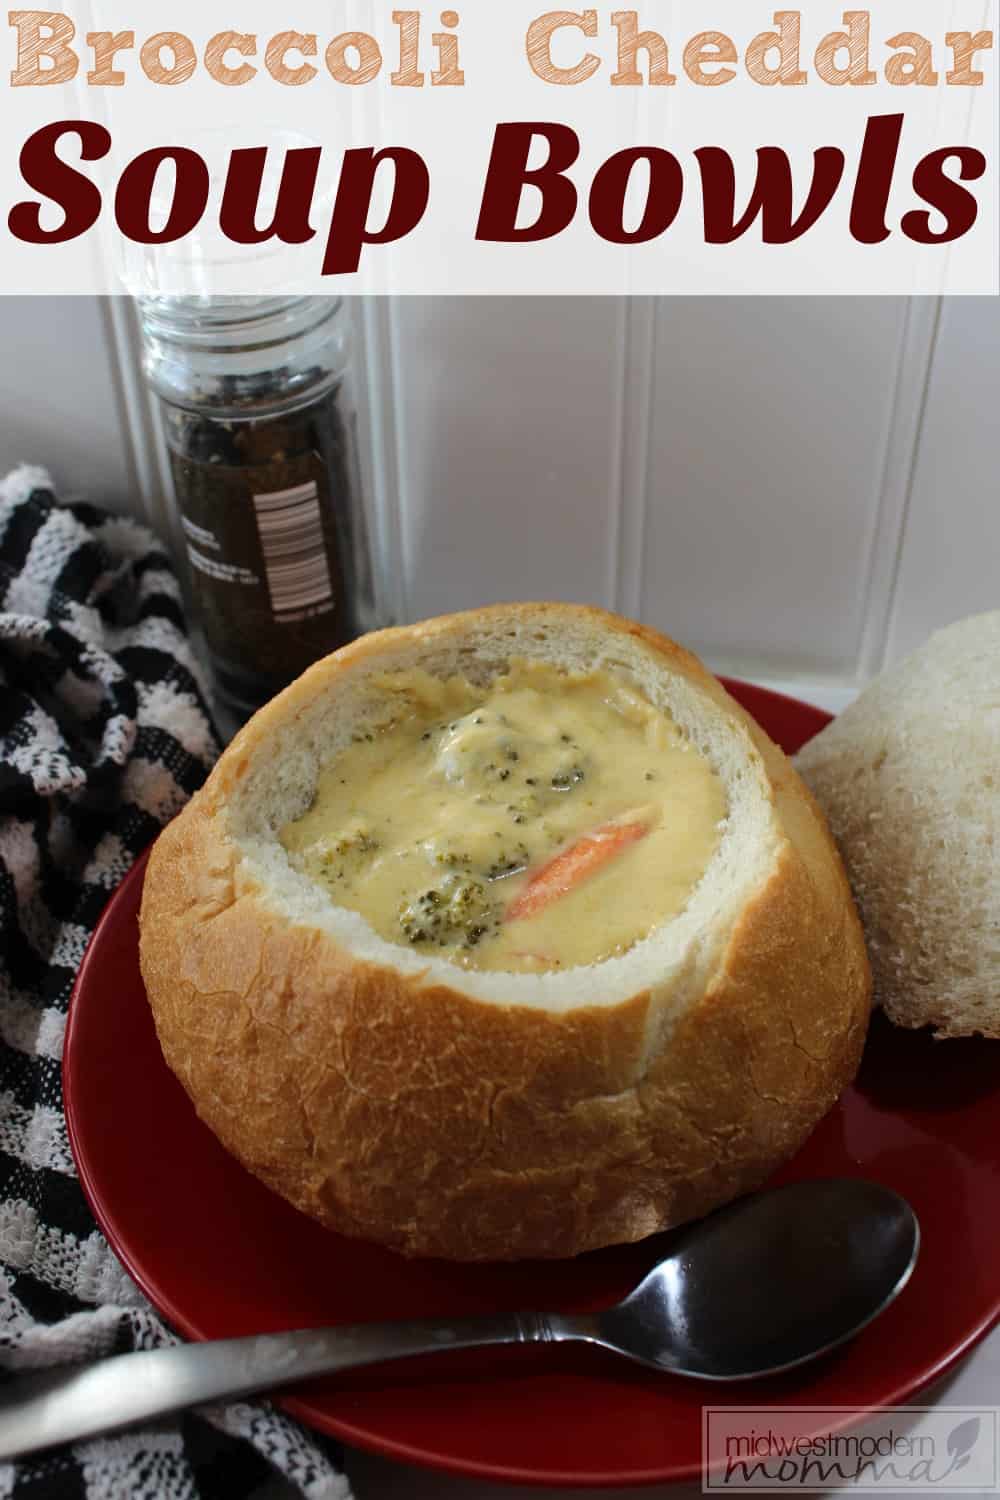 Make a delicious Broccoli Cheddar Cheese Soup to serve in warm crusty bread bowls for your family. This is a great soup full of veggies that everyone loves!